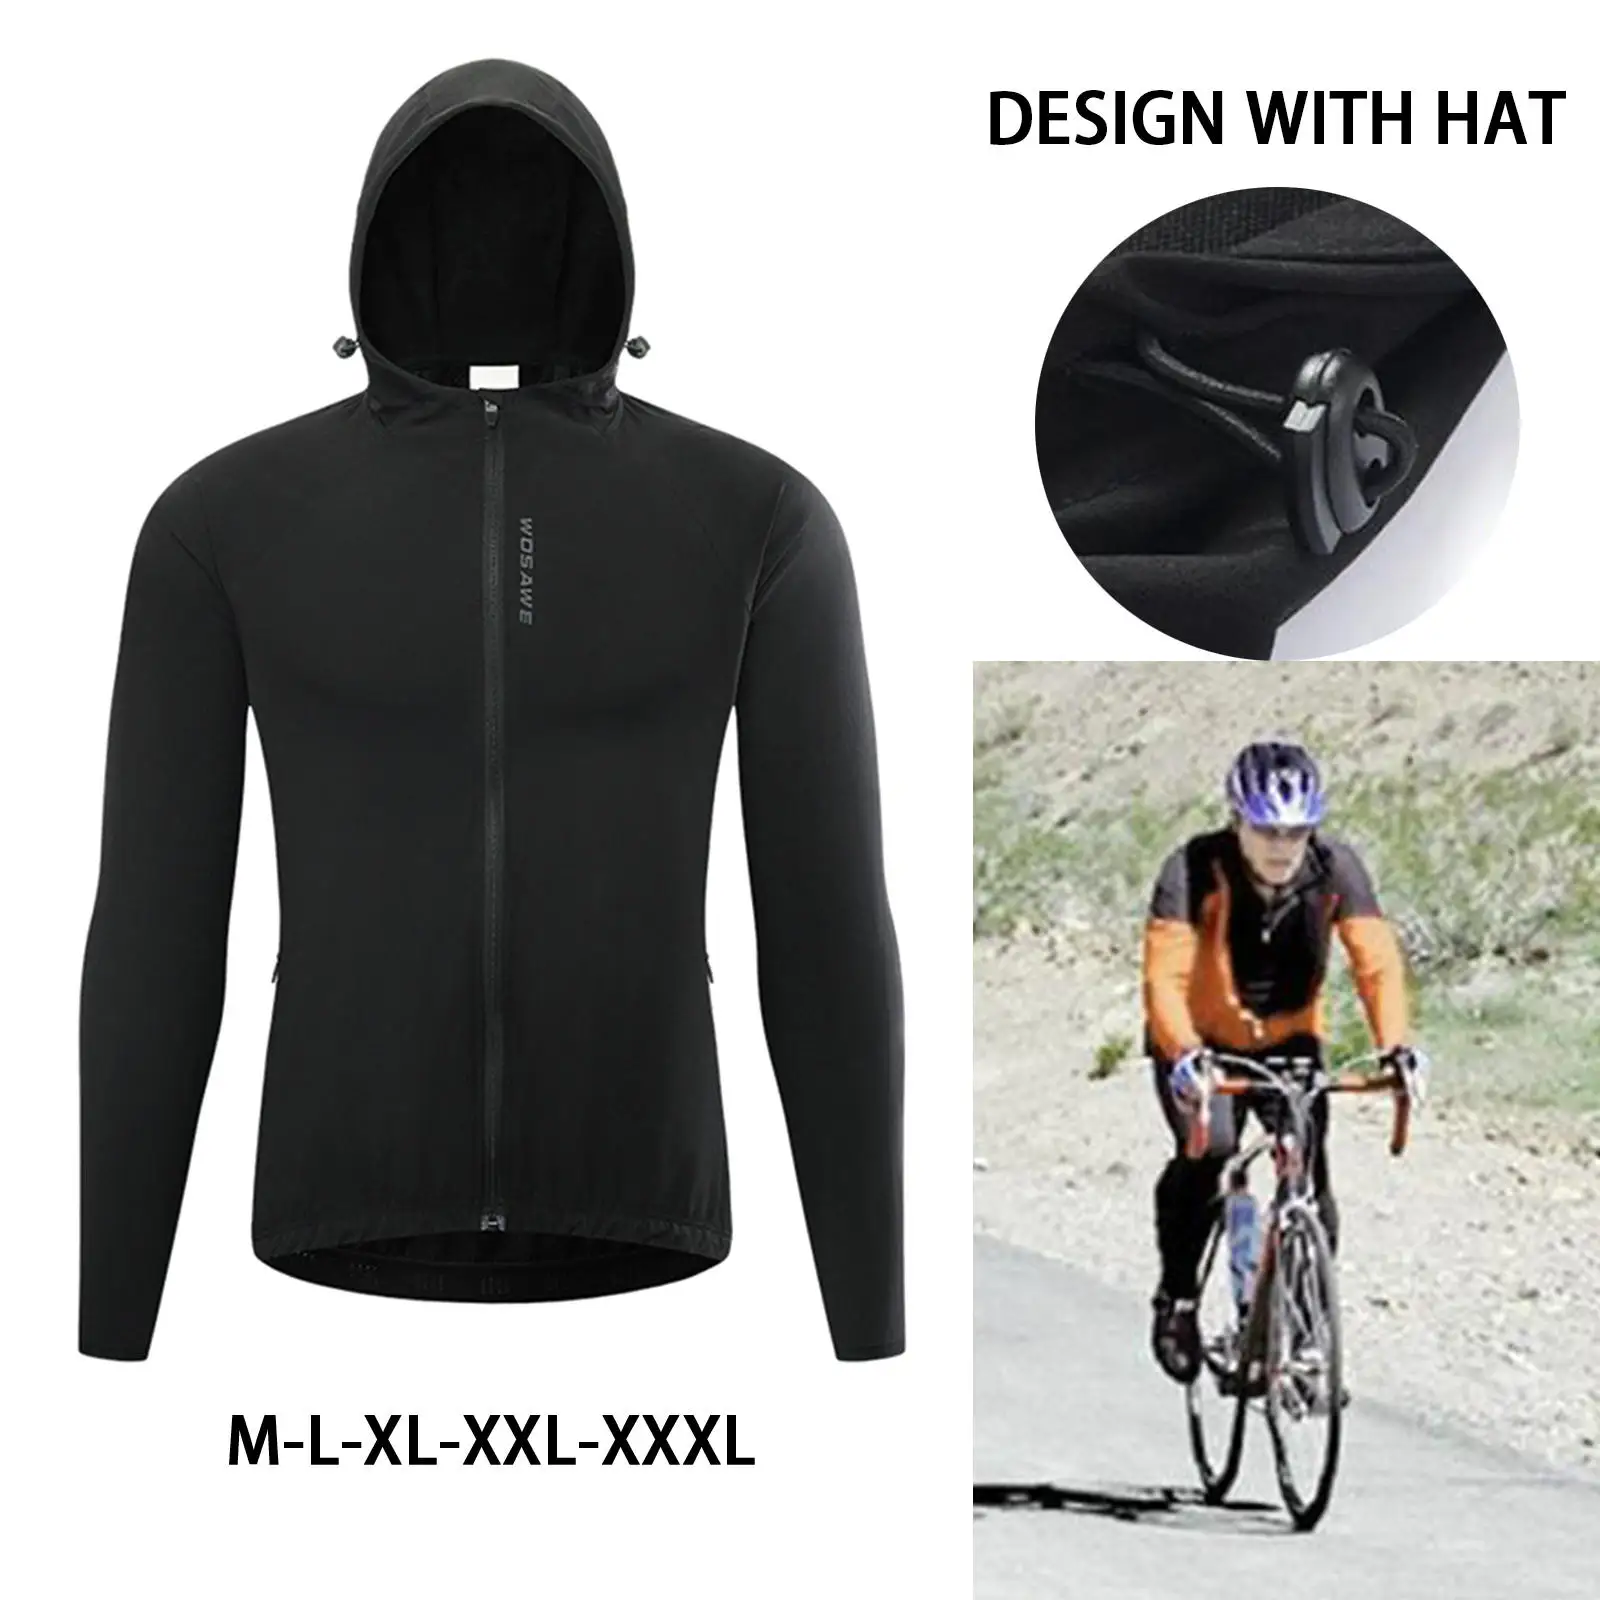 Windproof Cycling Jackets Men Riding Windbreaker Lightweight Riding Reflective Gym Training Hooded Coat for Bike Riding